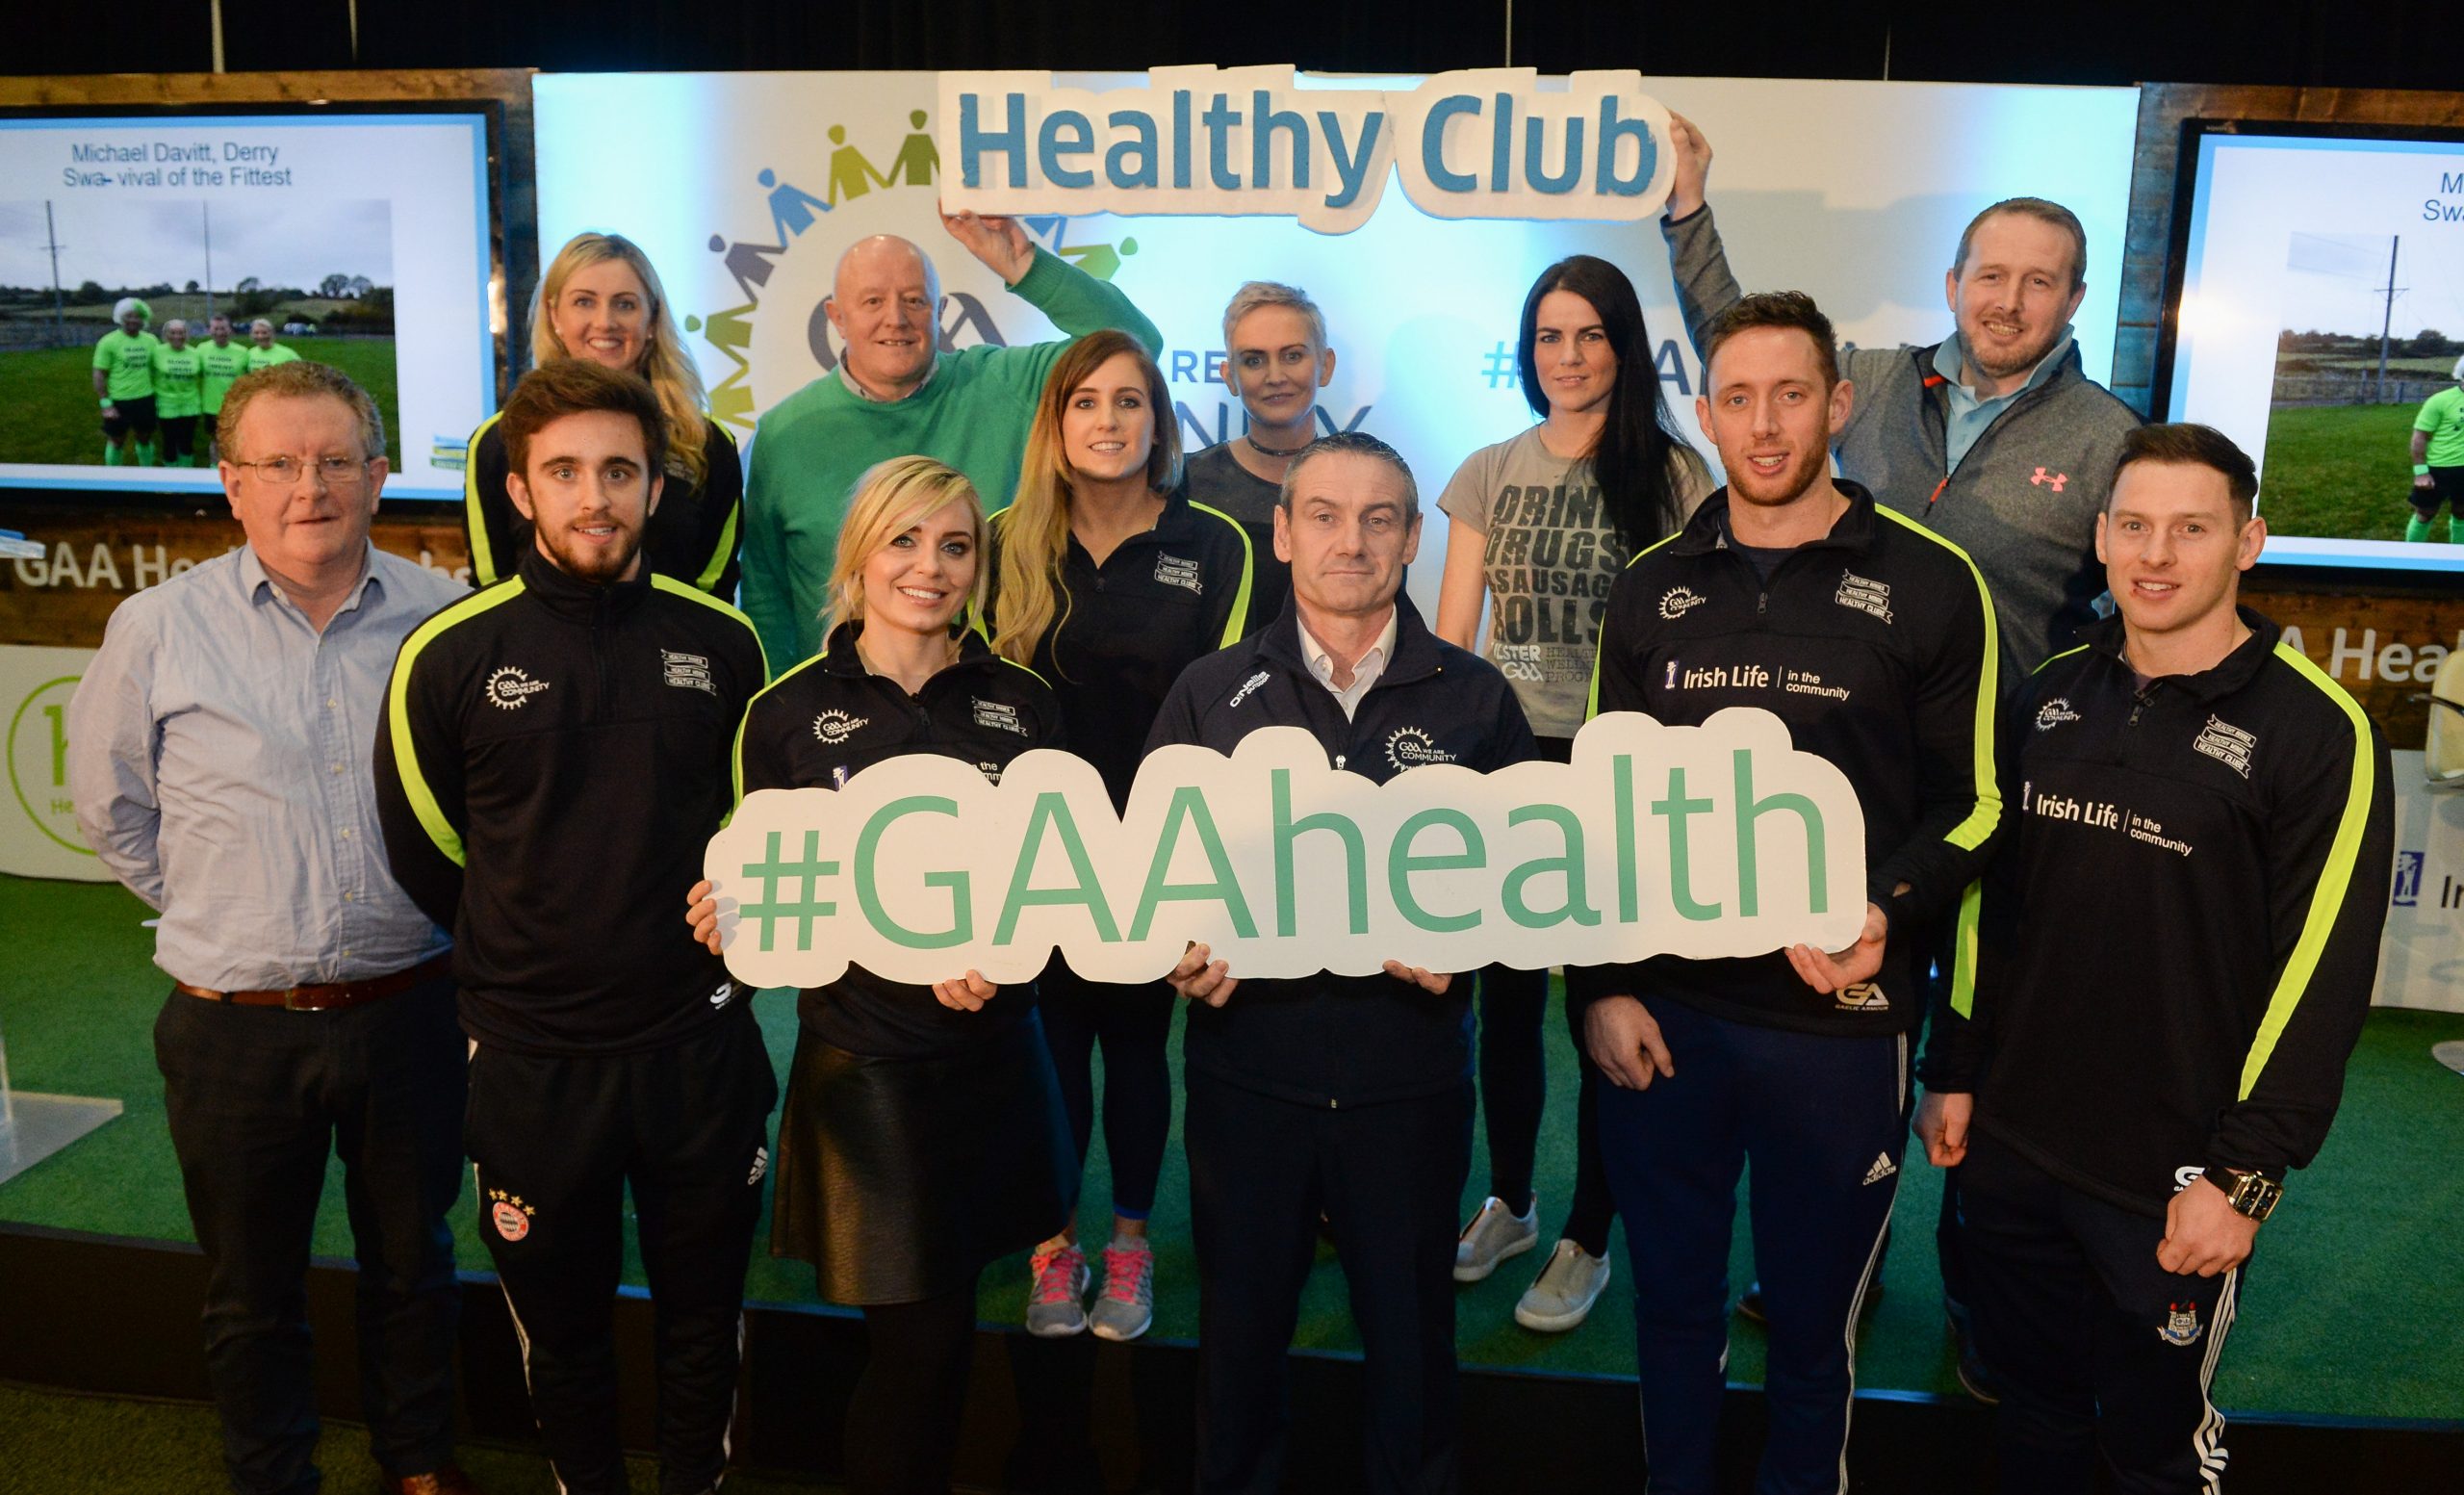 Healthy Clubs Roadshow gives valuable insight to well-being initiatives